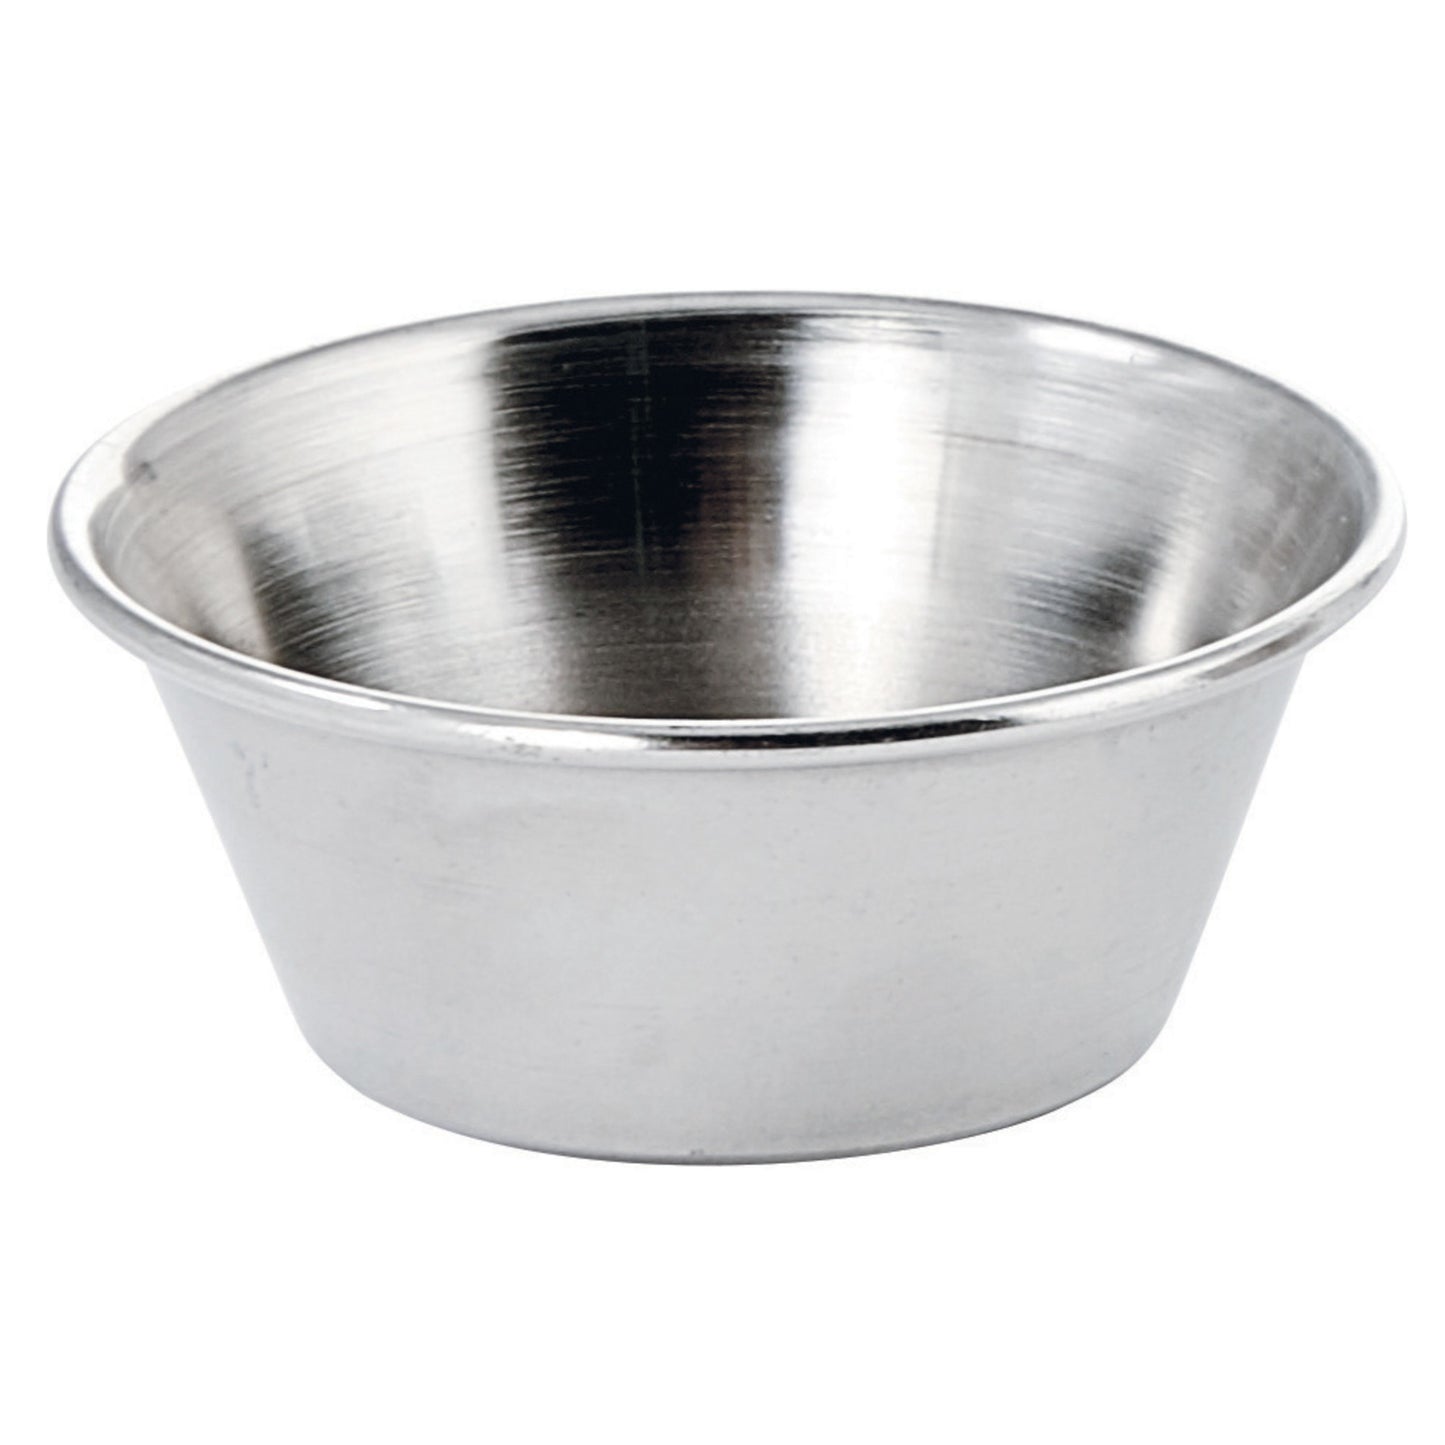 SCP-15 - Stainless Steel Sauce Cup - 1-1/2 oz